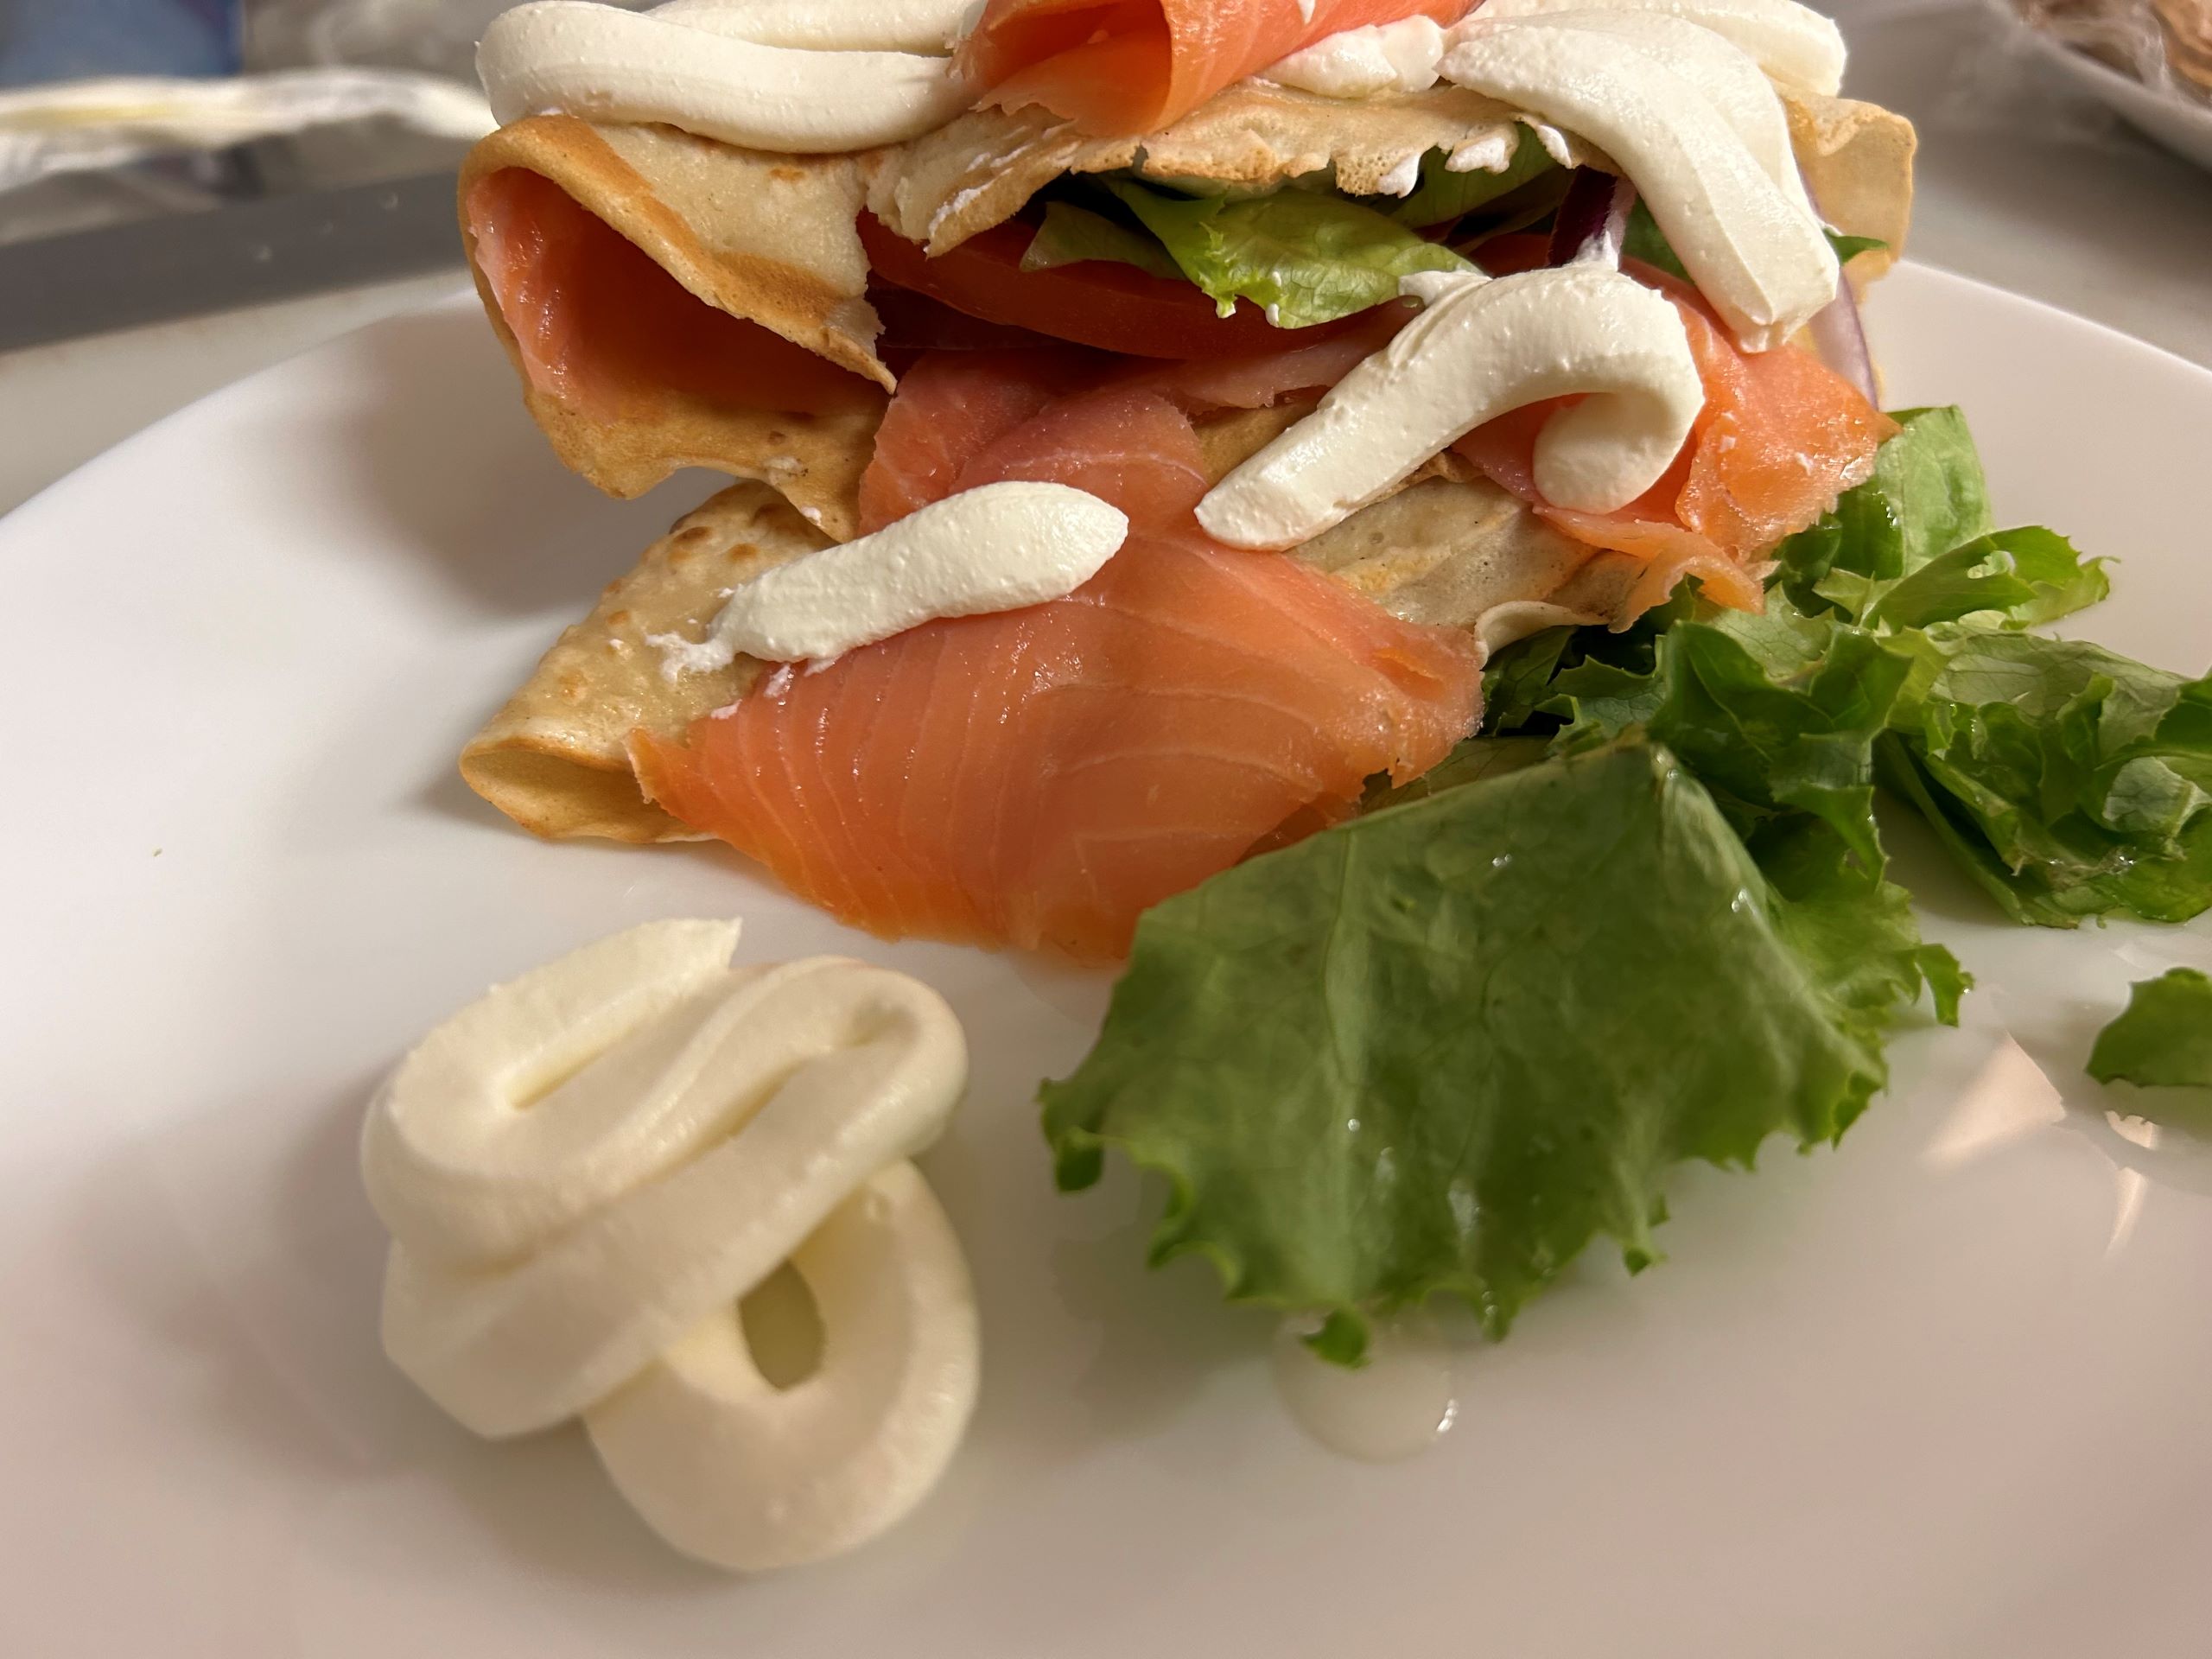 Slices of Smoked Salmon and Cream Cheese Spread artfully wrapped in a blintz pancake with crispy lettuce and slices of tomatoes on a white plate.